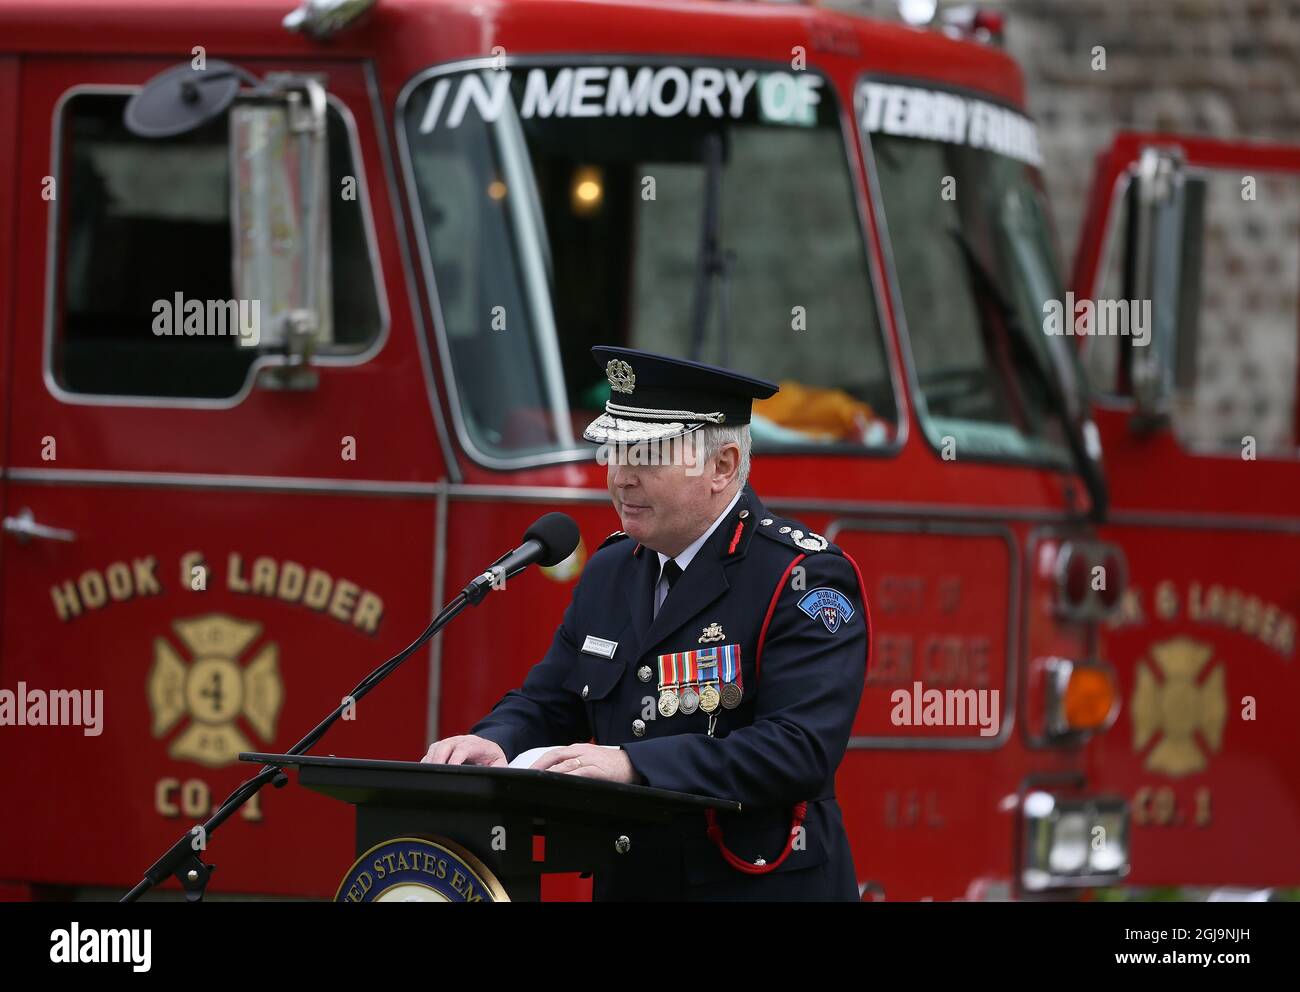 Dennis Keeley, acting Chief Officer Dublin Fire Brigade, speaking during a 20th anniversary event at the US Ambassador's Residence in Dublin to commemorate the lives lost during the 9/11 attacks. Picture date: Wednesday August 25, 2021. Stock Photo